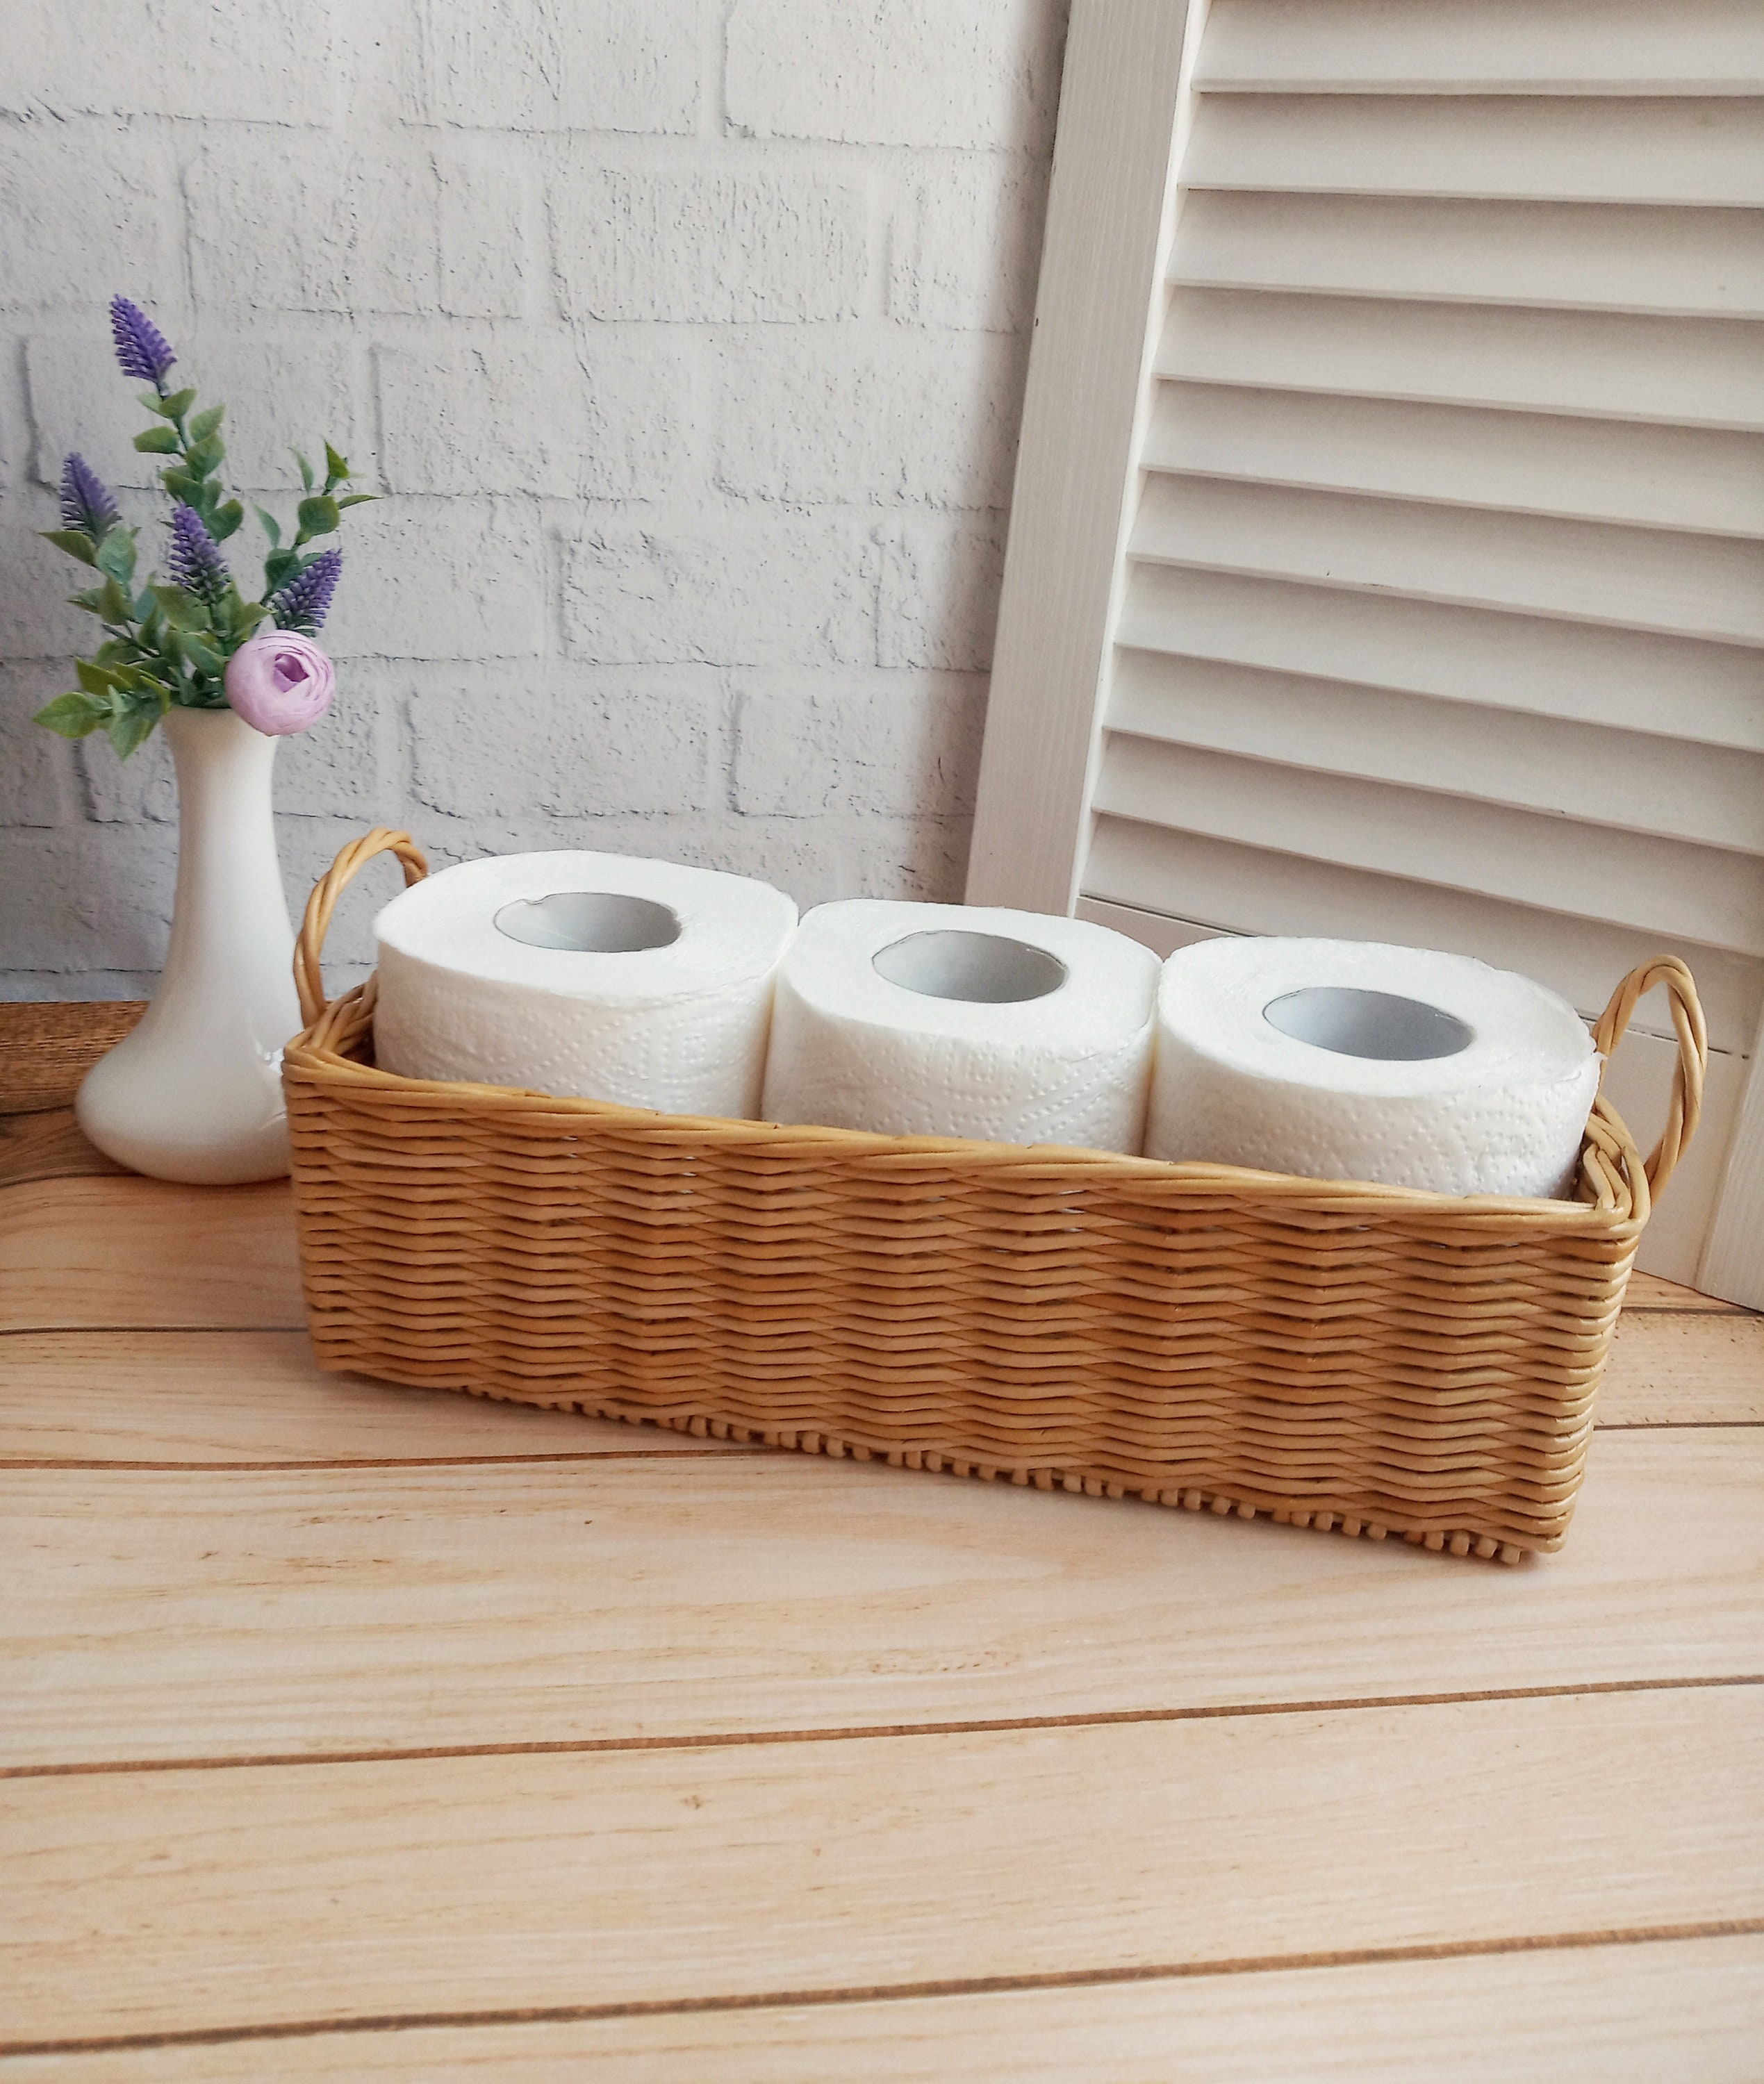 GRANNY SAYS Small Wicker Baskets for Organizing, Rectangle Toilet Paper  Storage Baskets, Towel Baskets for Bathroom Organizing, Back of Toilet  Storage